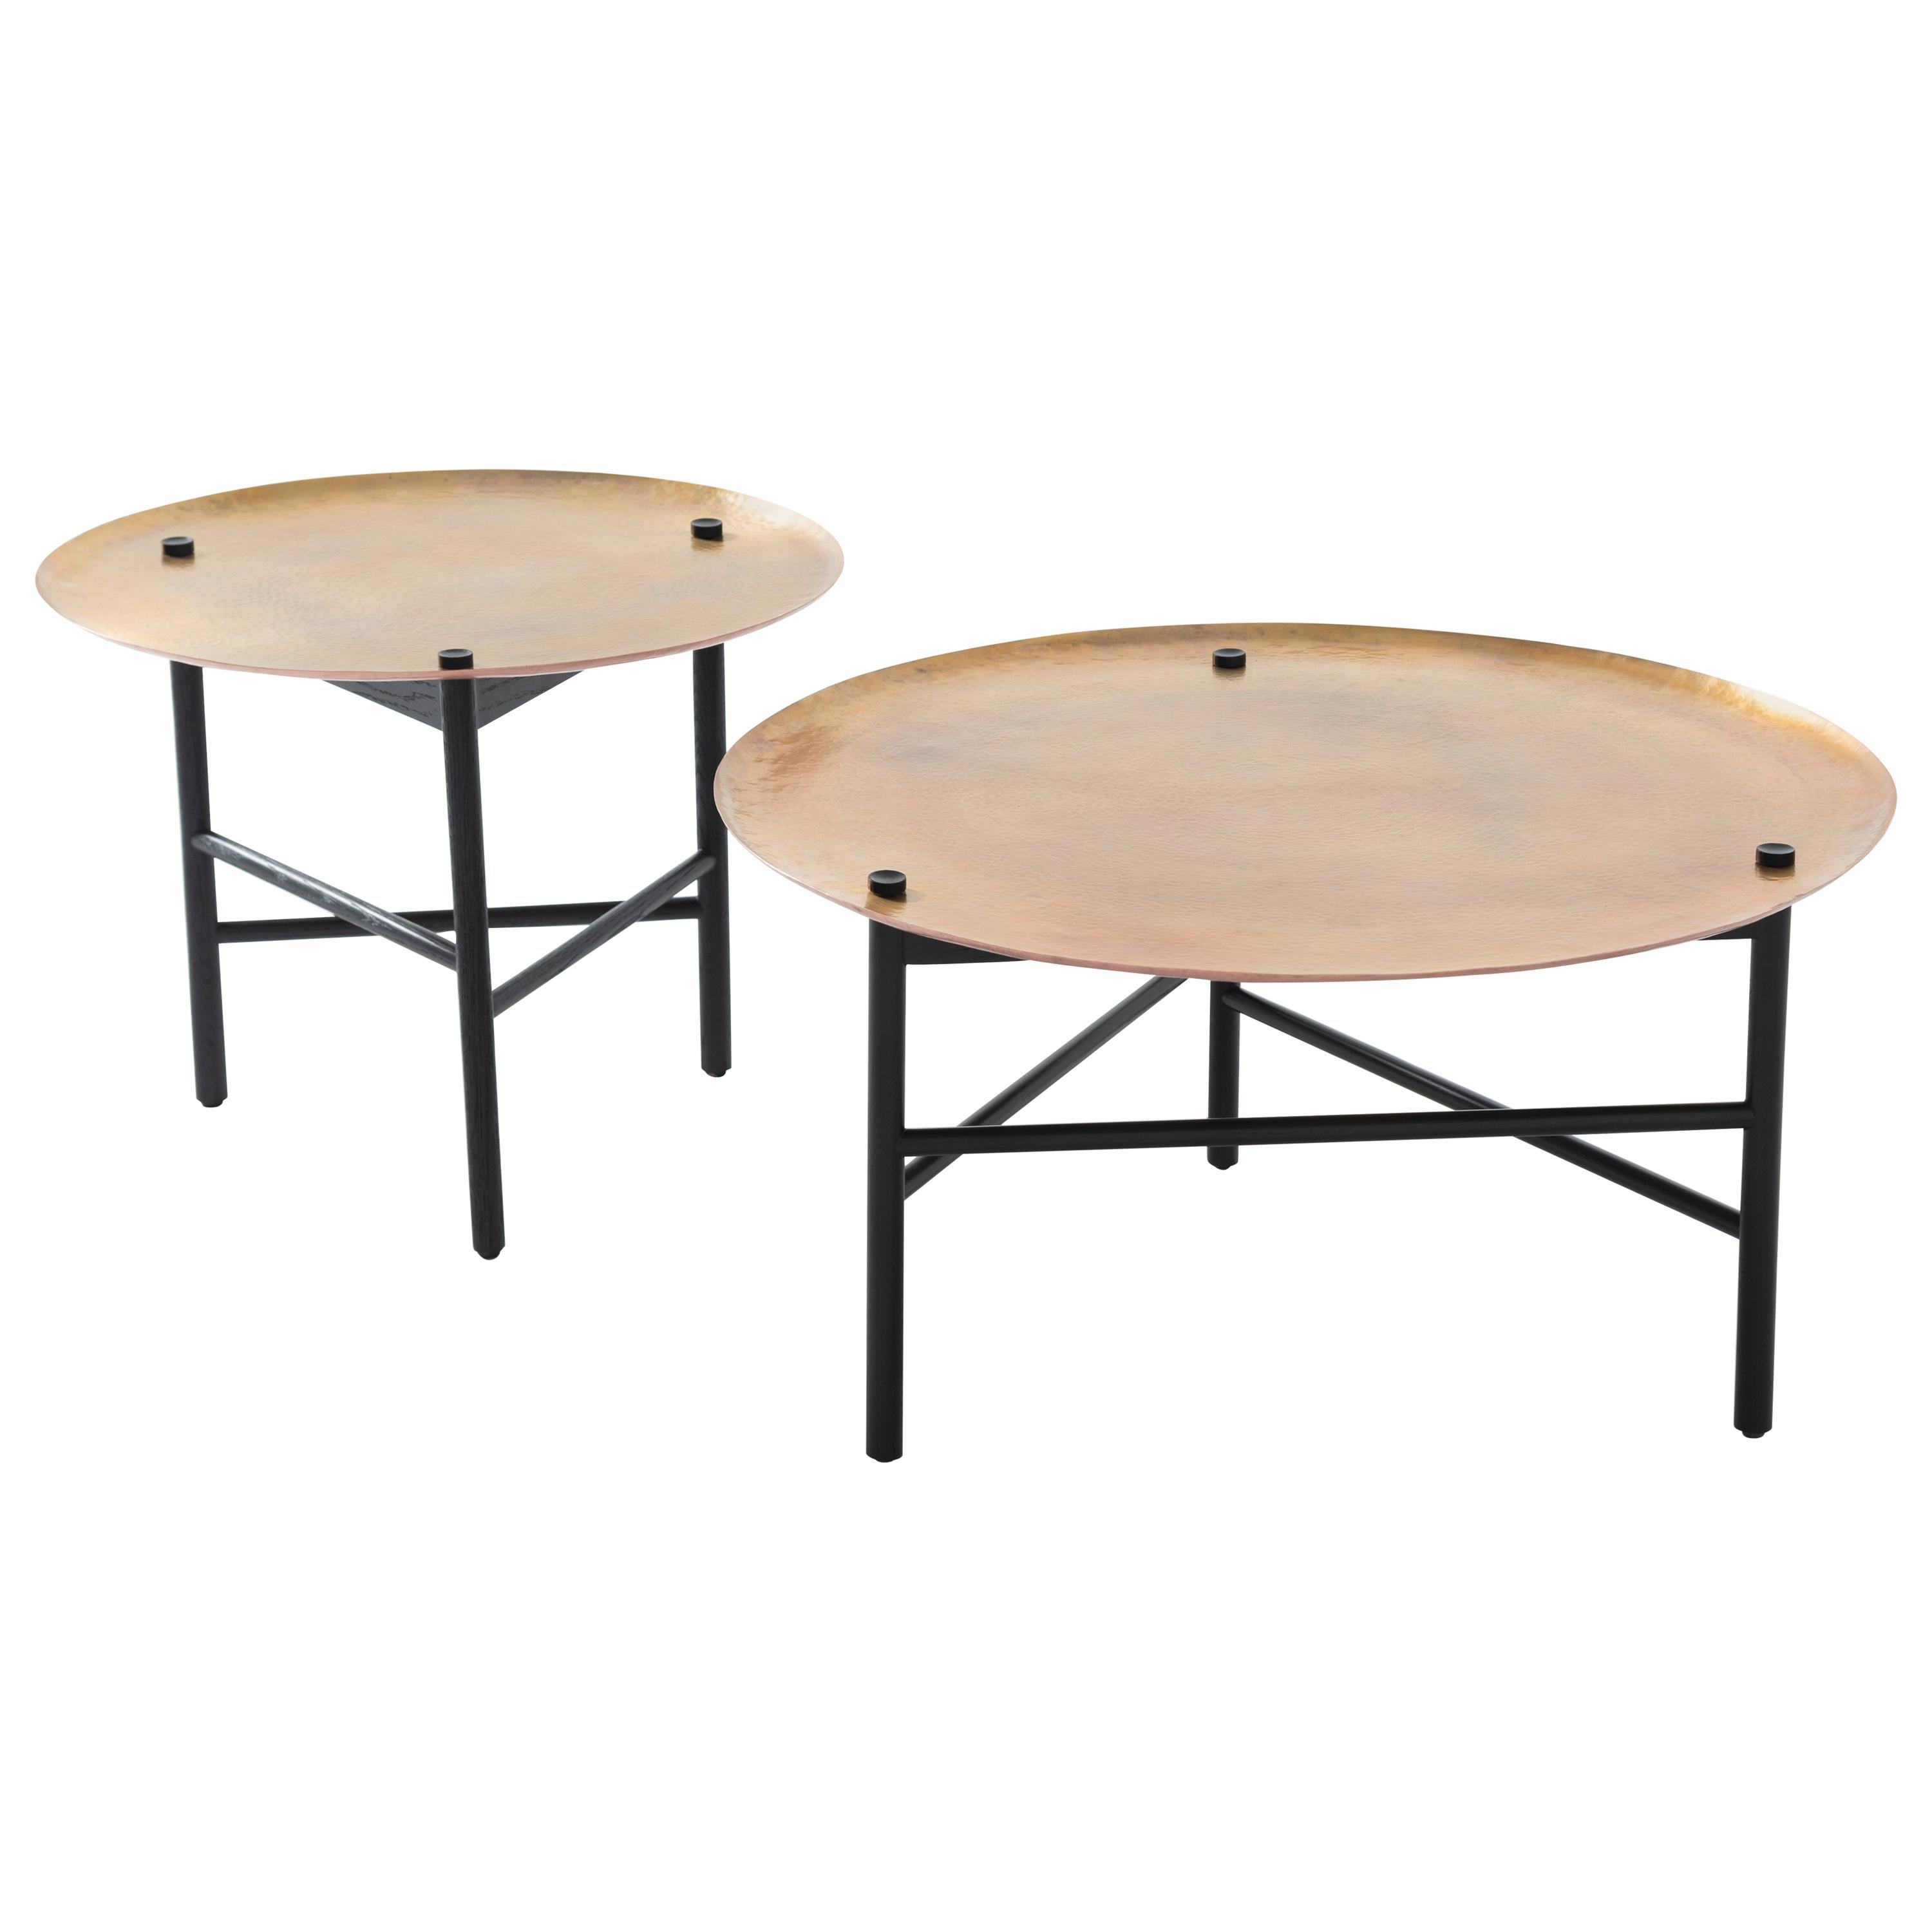 Auxiliar Tables, Black Oak Structure Hand Hammered Copper Brass Finish Top